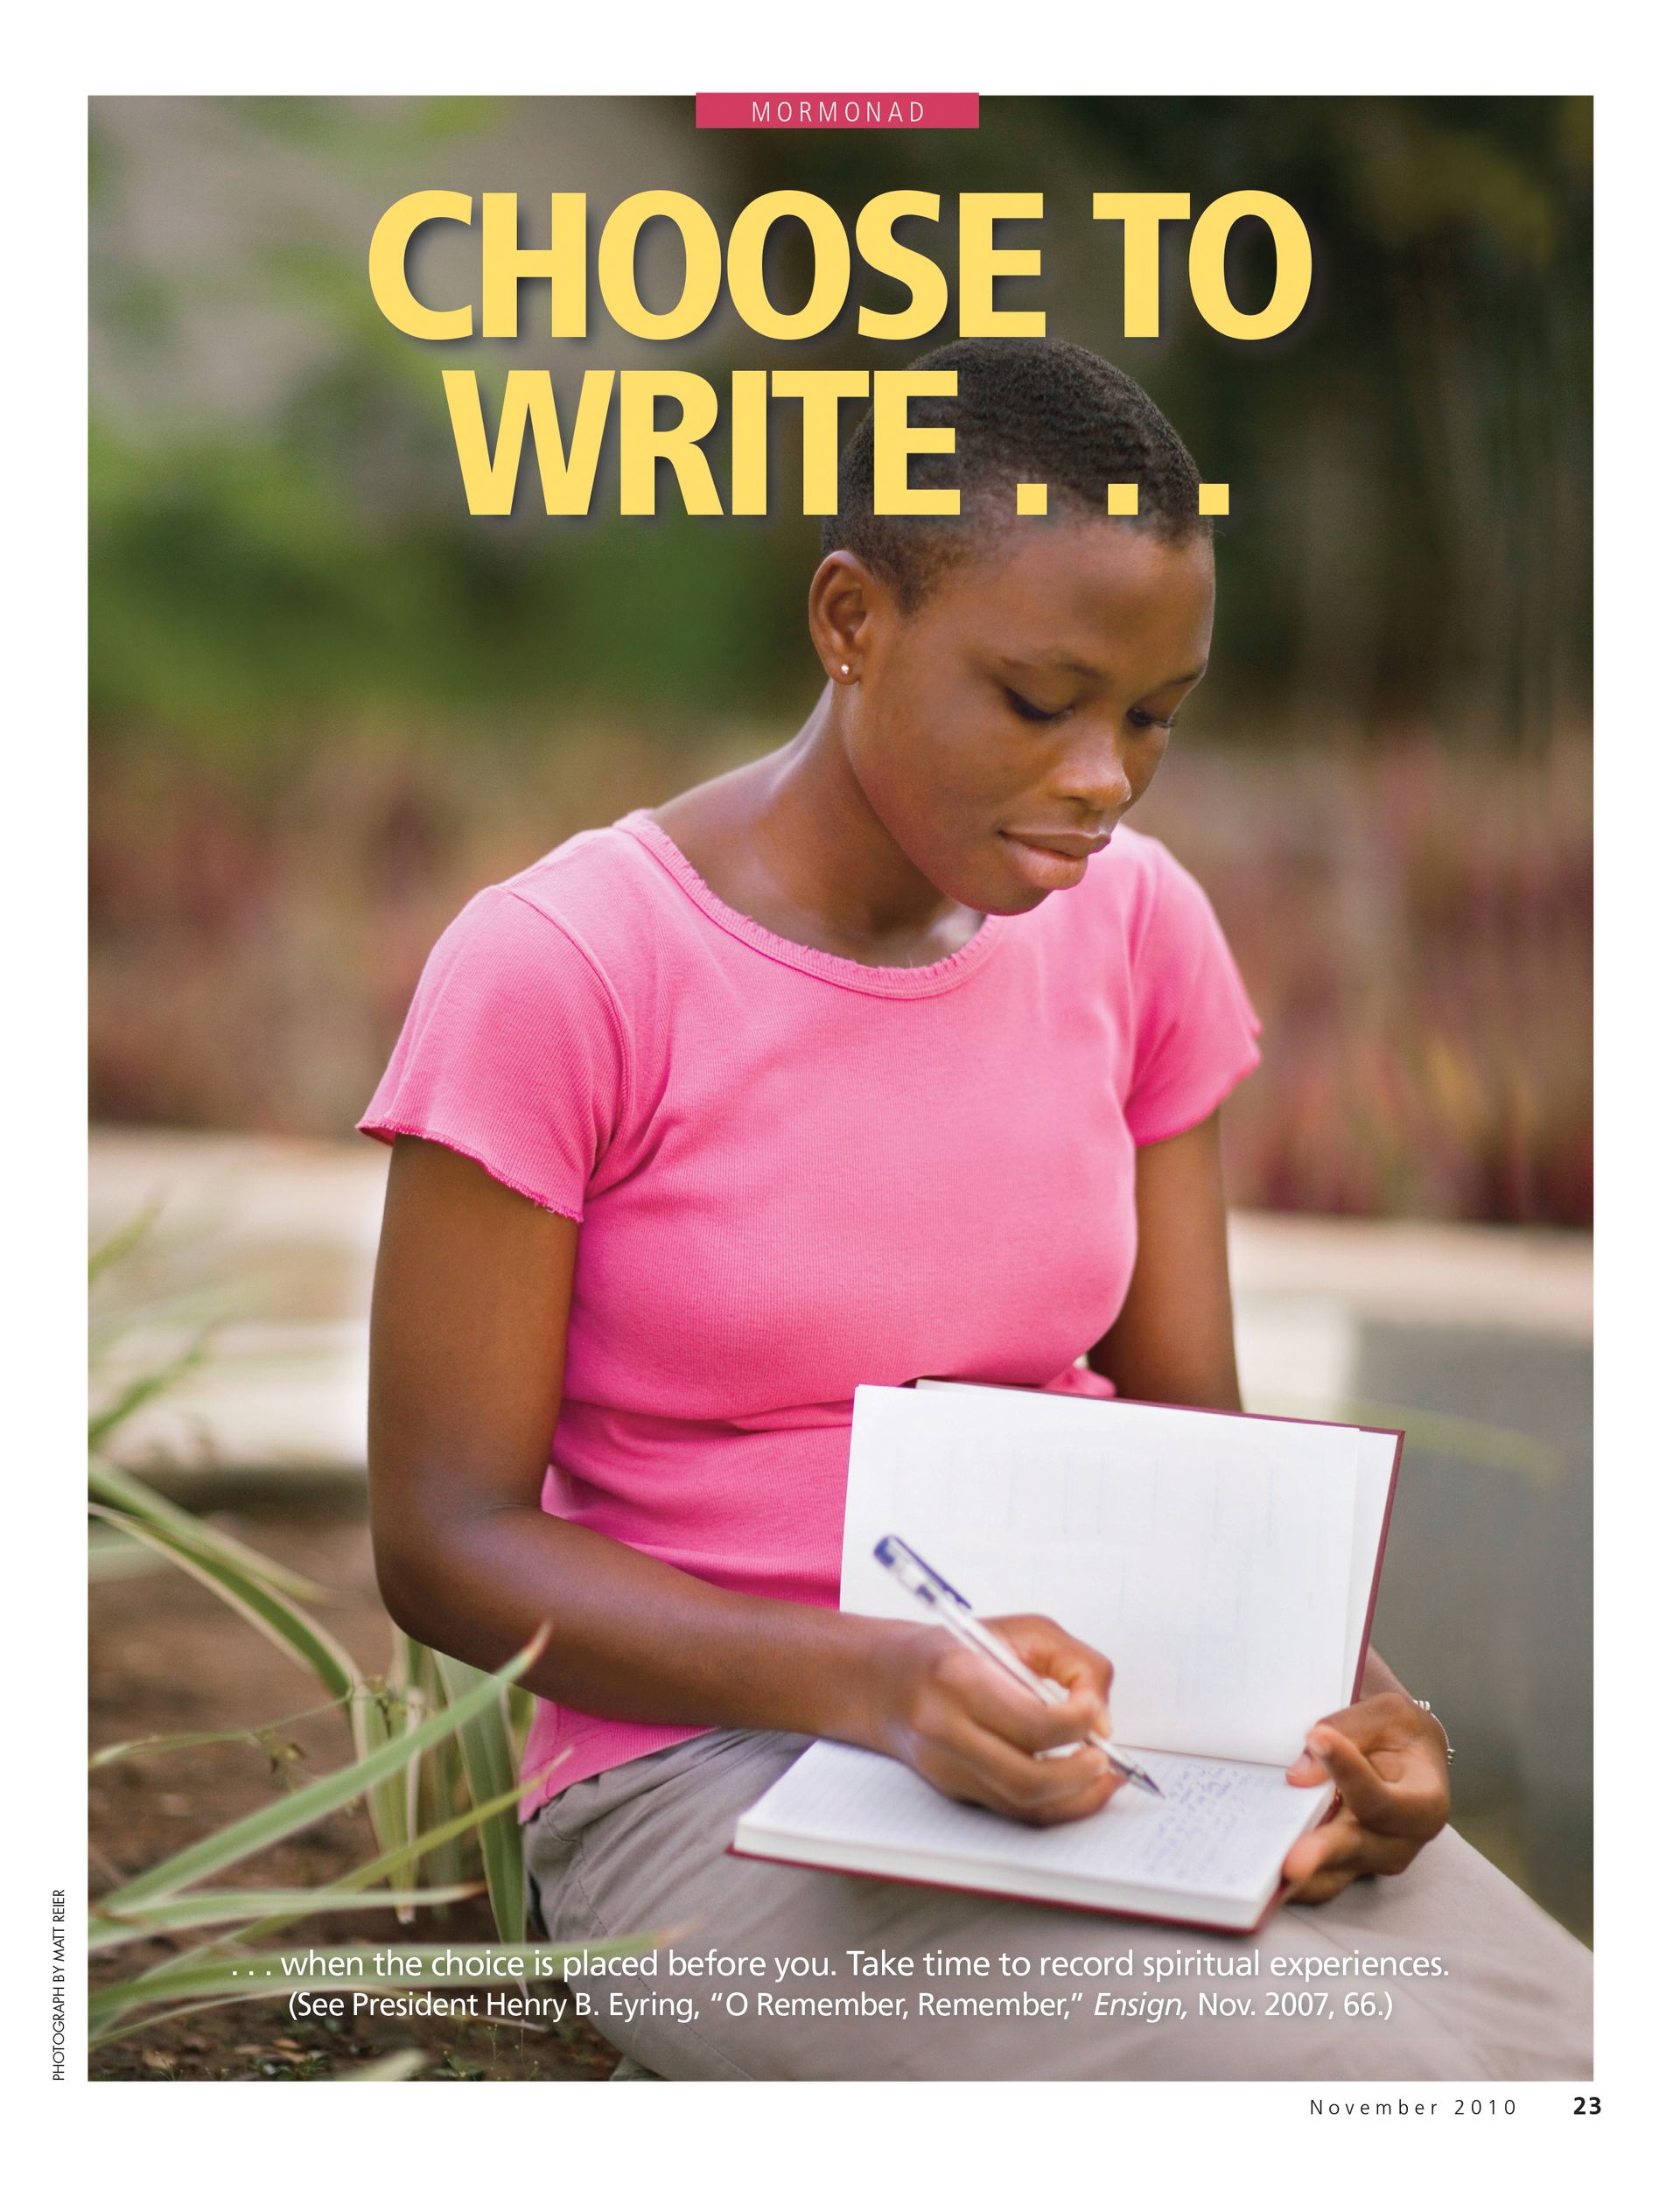 Choose to Write … when the choice is placed before you. Take time to record spiritual experiences. (See President Henry B. Eyring, “O Remember, Remember,” Ensign, Nov. 2007, 66.) Nov. 2010 © undefined ipCode 1.